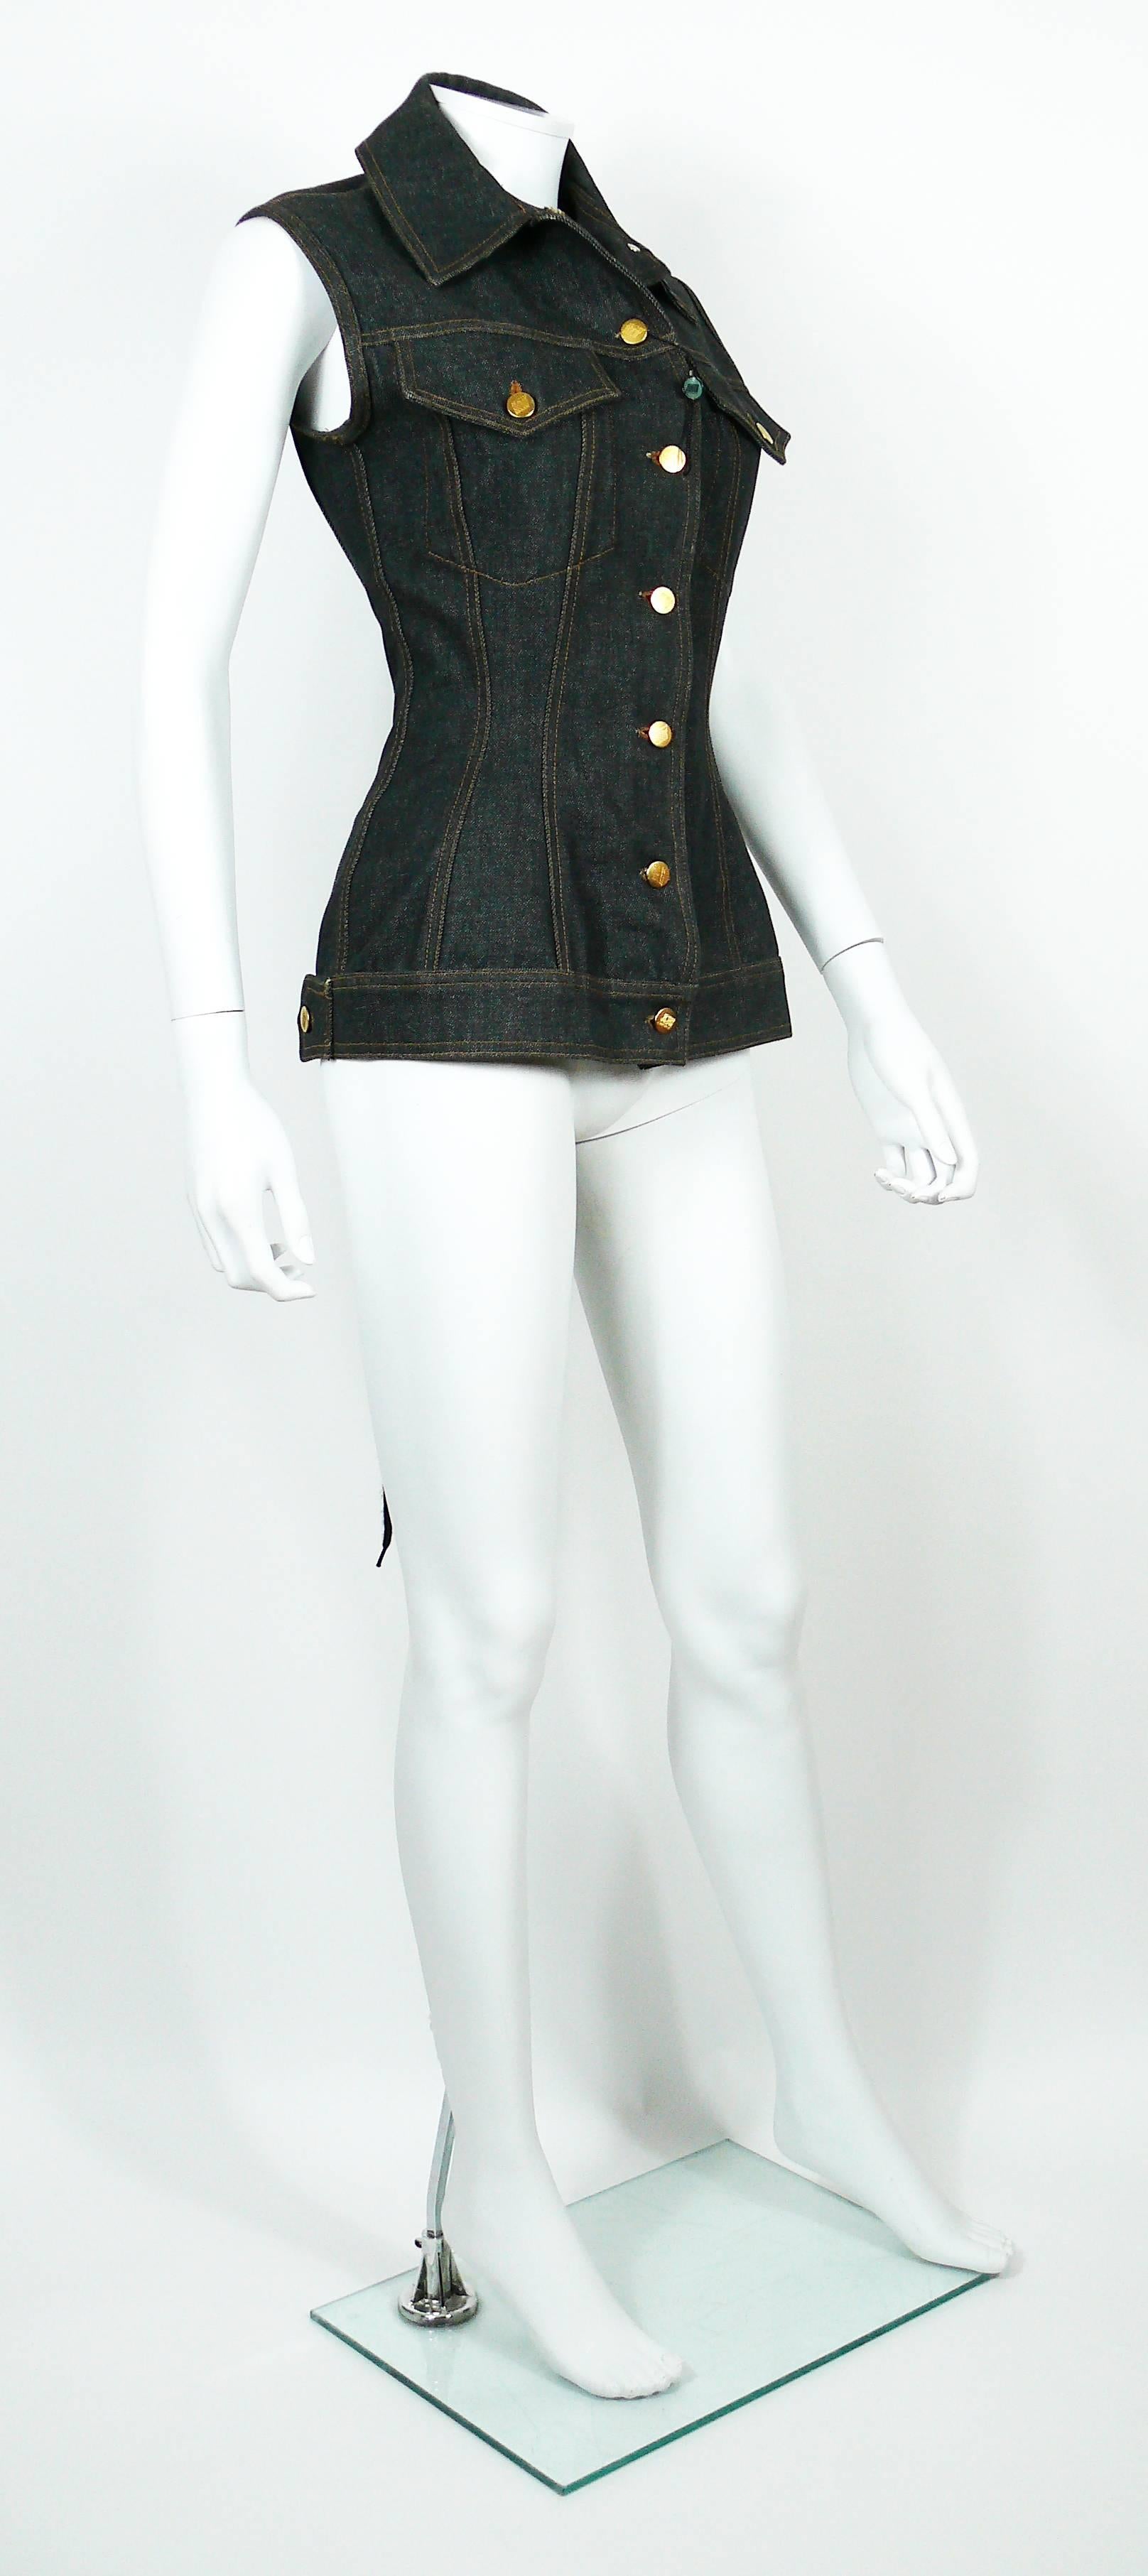 JEAN PAUL GAULTIER vintage distressed black denim corset style sleeveless jacket.

This jacket features :
- Beautiful iconic back lace up detail.
- Classic collar.
- Front button fastening.
- Pocket detail at the chest.
- Gold toned signature JUNIOR